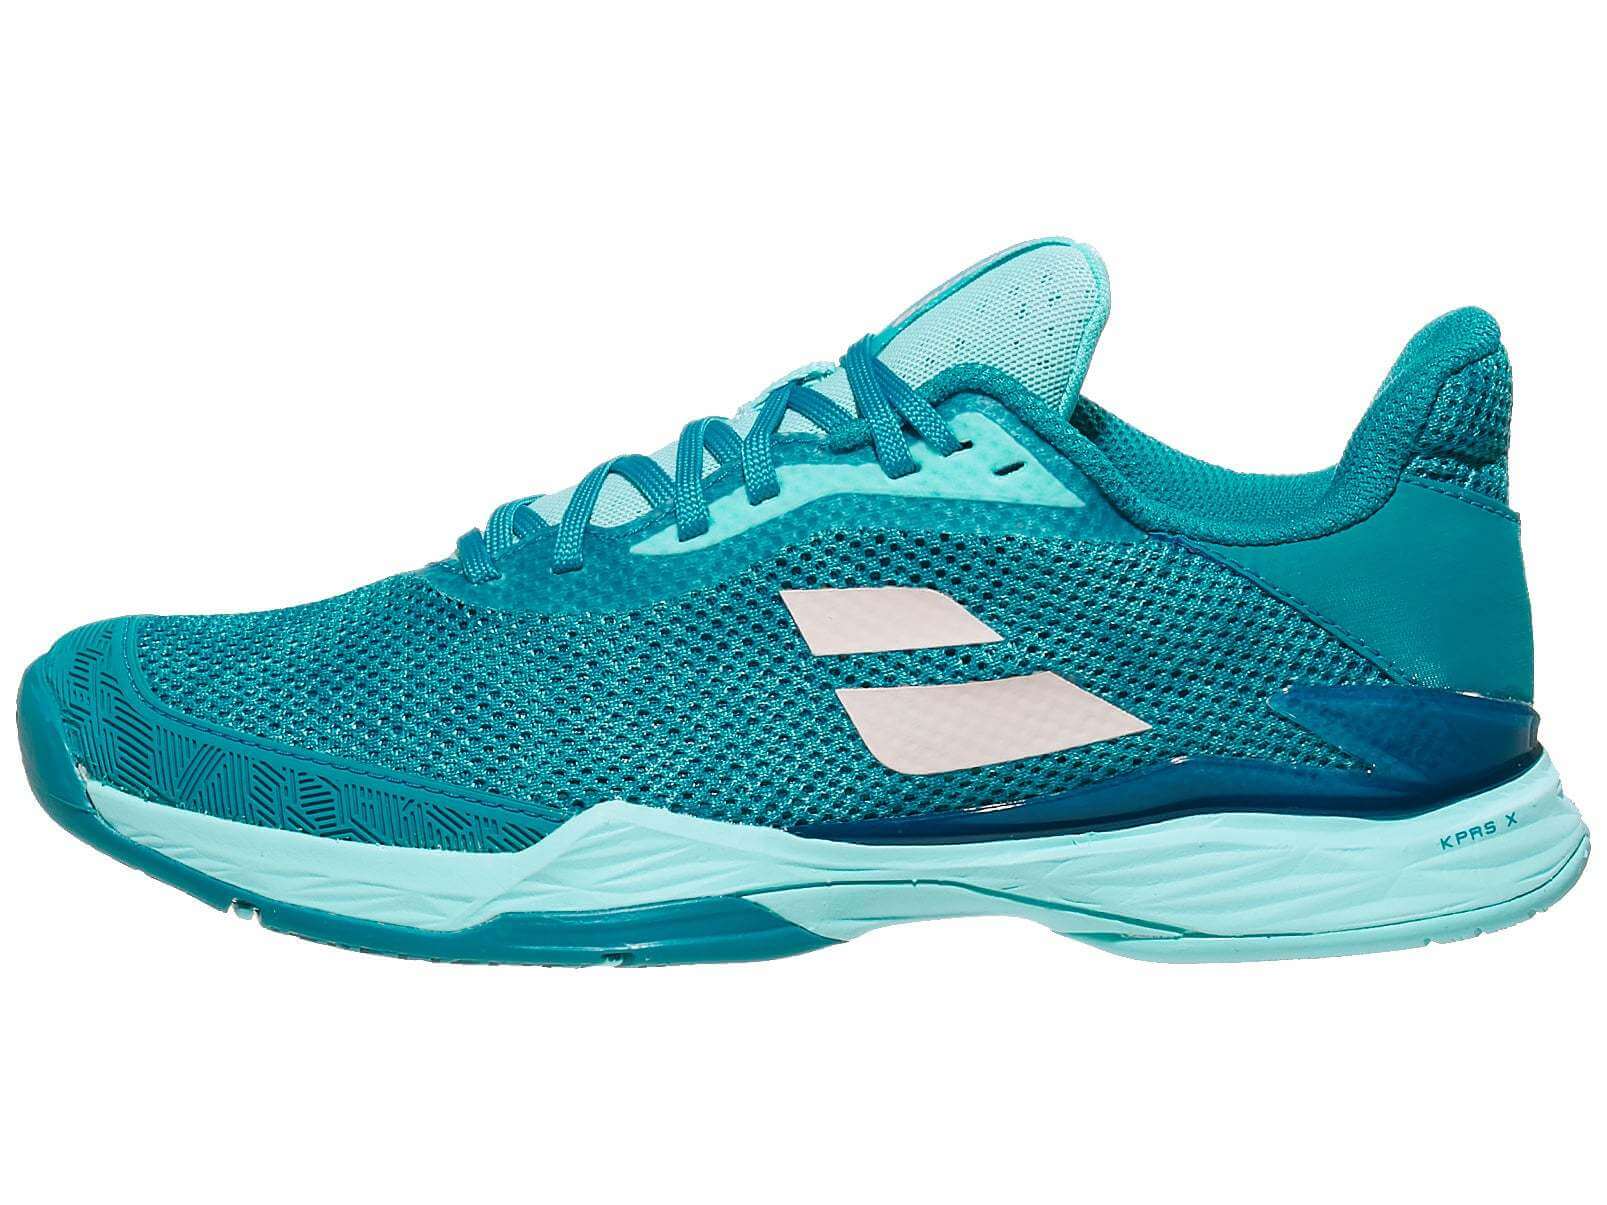 Babolat Jet Tere In-depth Review For Both Men and Women - Tennisshoeslab